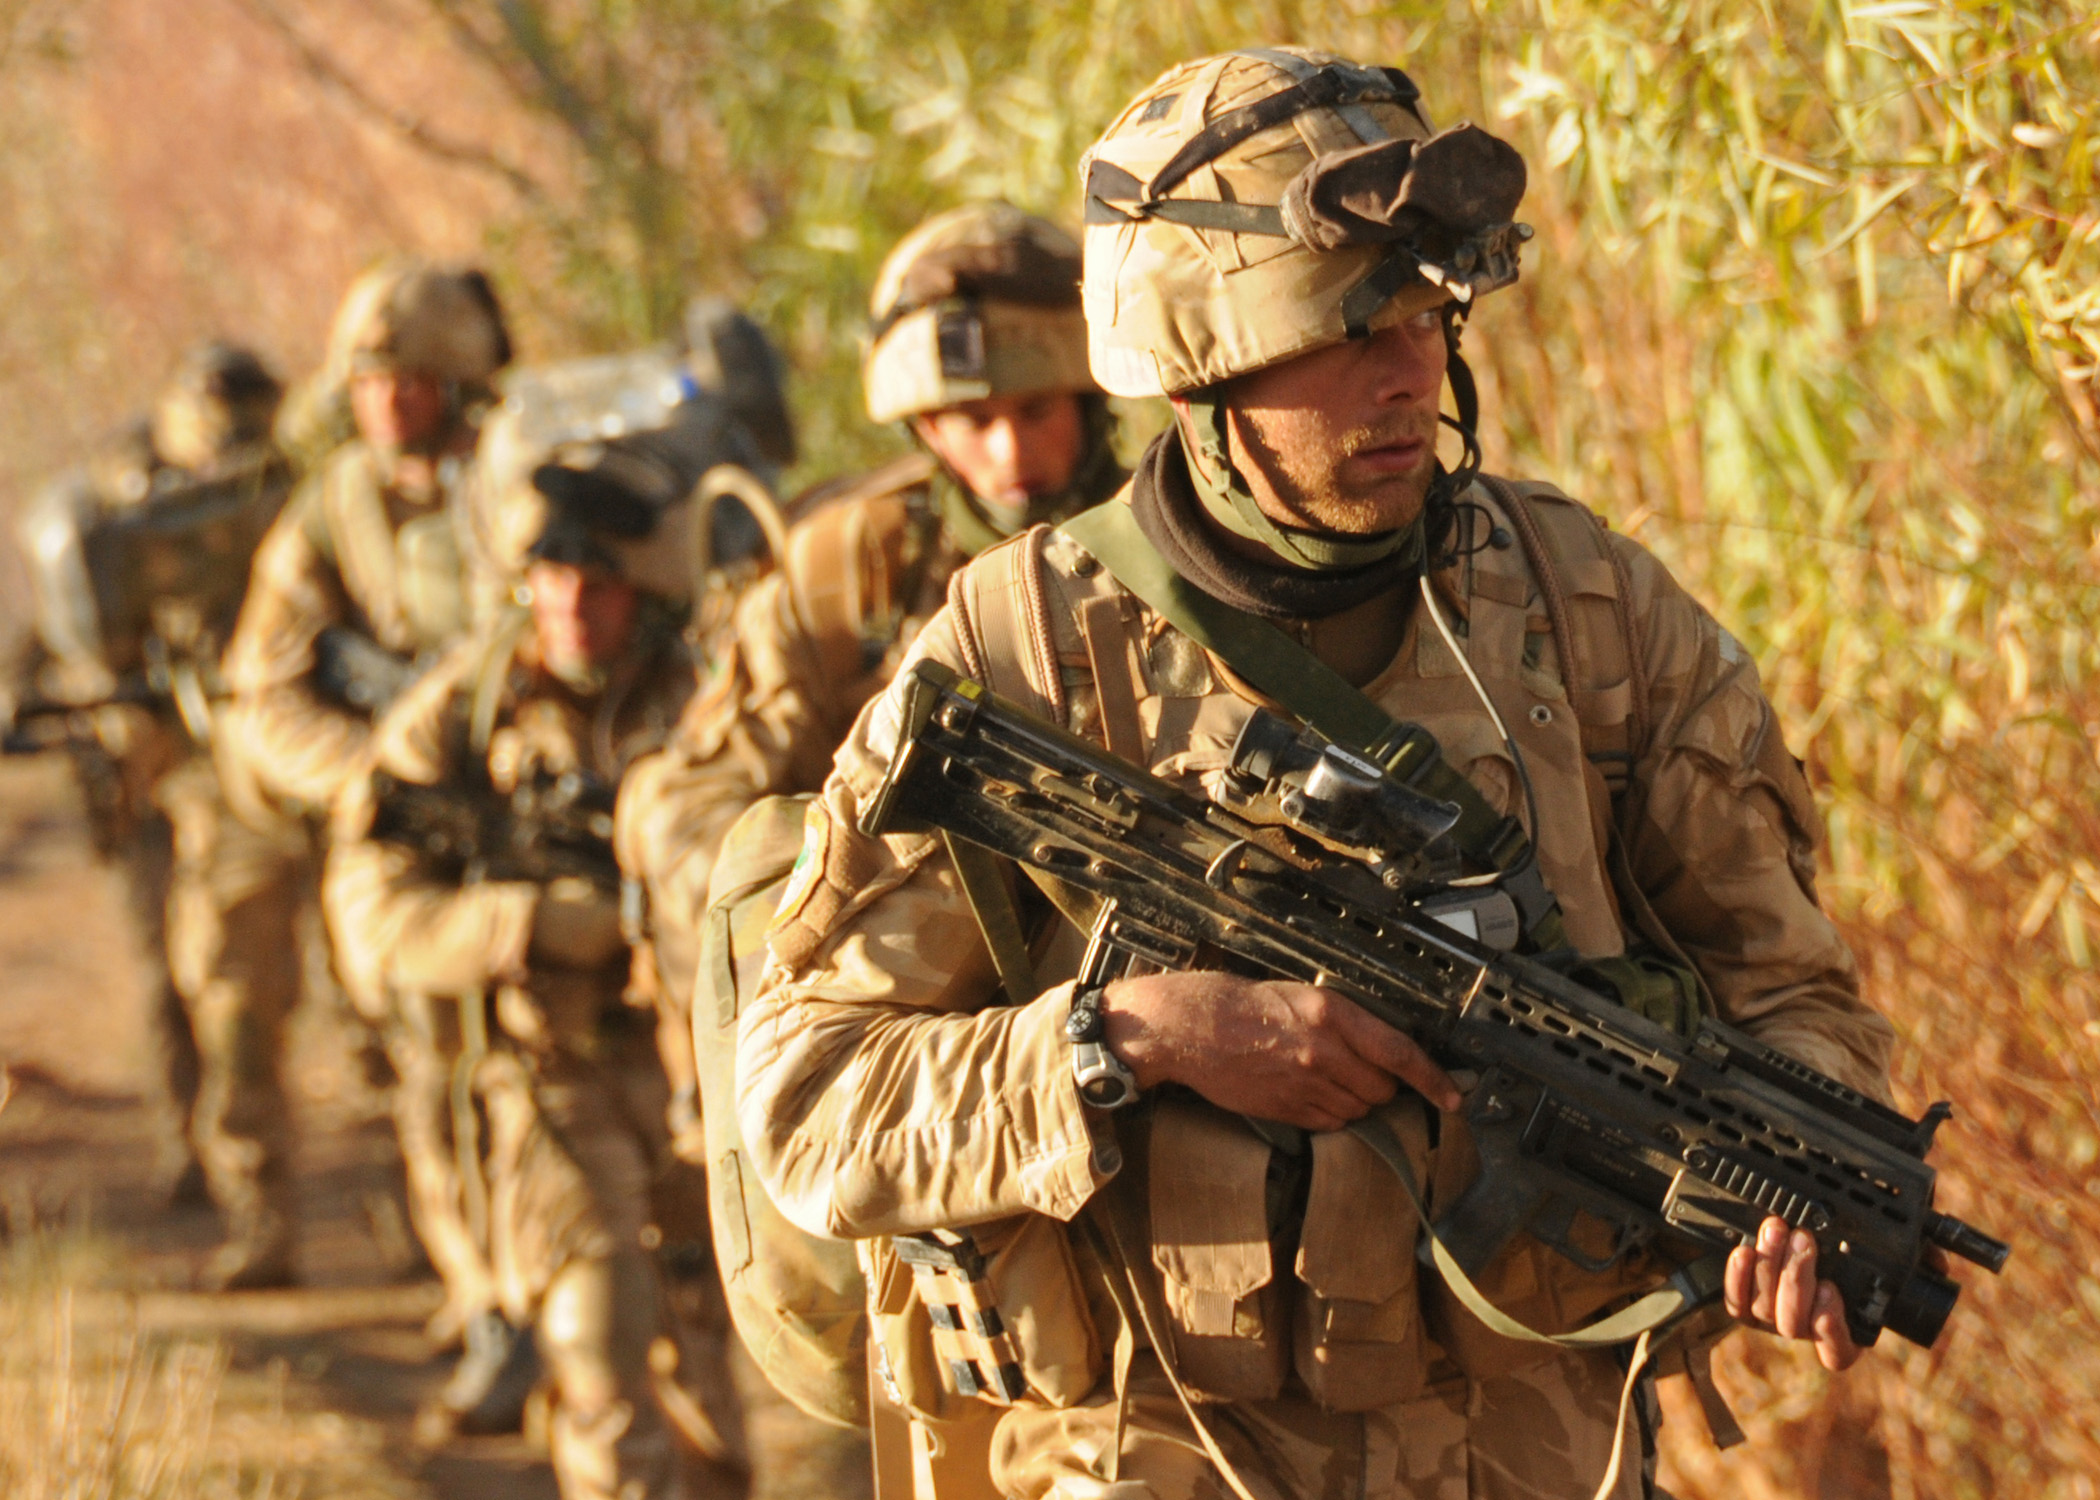 British Royal Marine Commandos take part in Operation Sond Chara, the clearance of Nad-e Ali District of Helmand Province in southern Afghanistan in 2009. DoD Photo